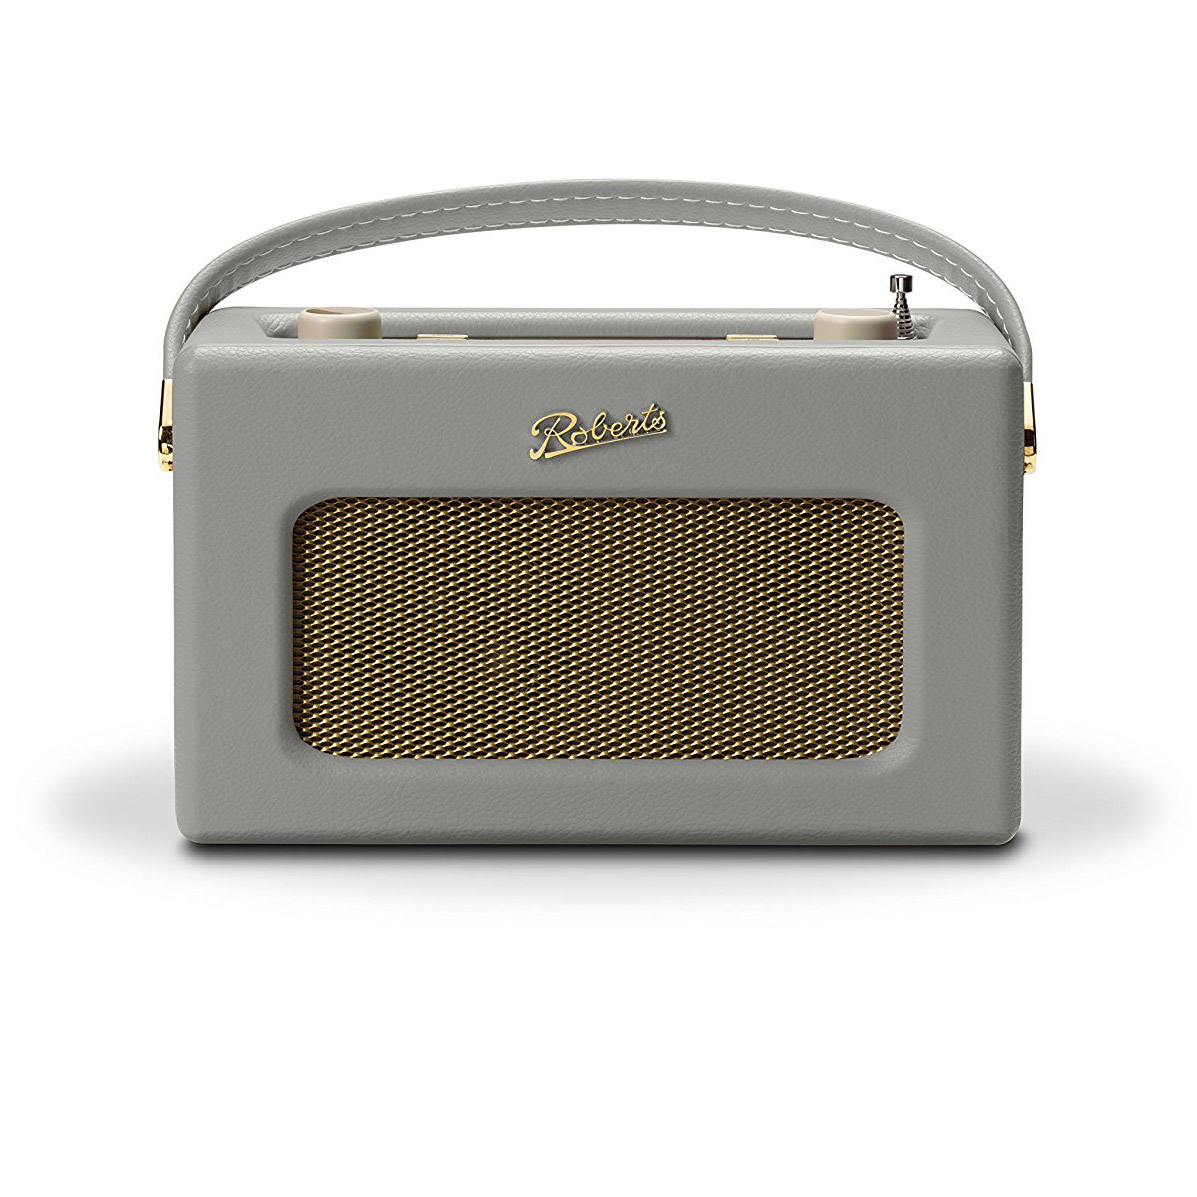 Image of Roberts RD70DG Portable DAB DAB FM RDS Radio in Dove Grey